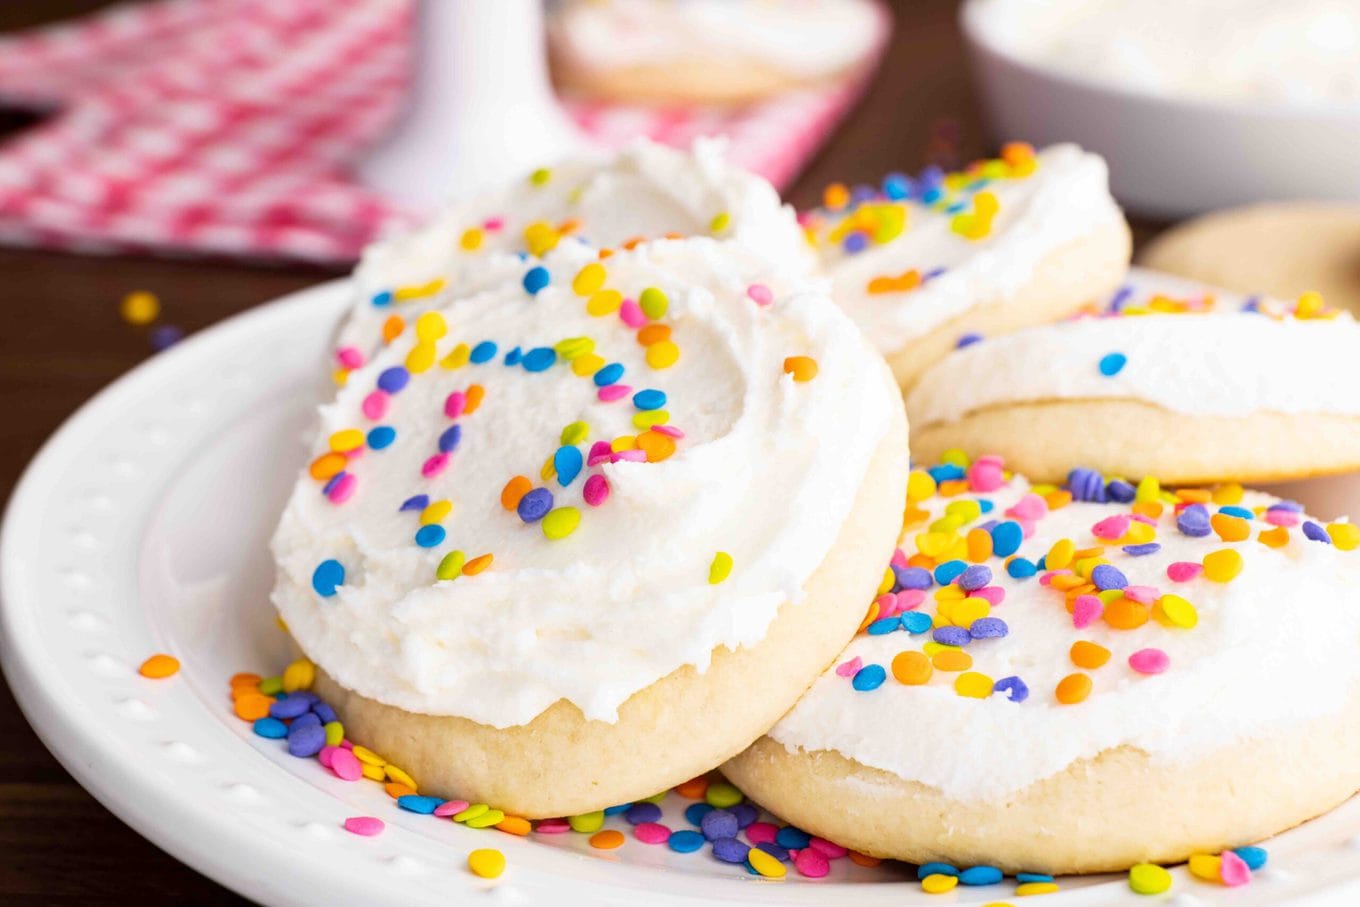 Lofthouse Sugar Cookies with white frosting and colorful sprinkles on plate